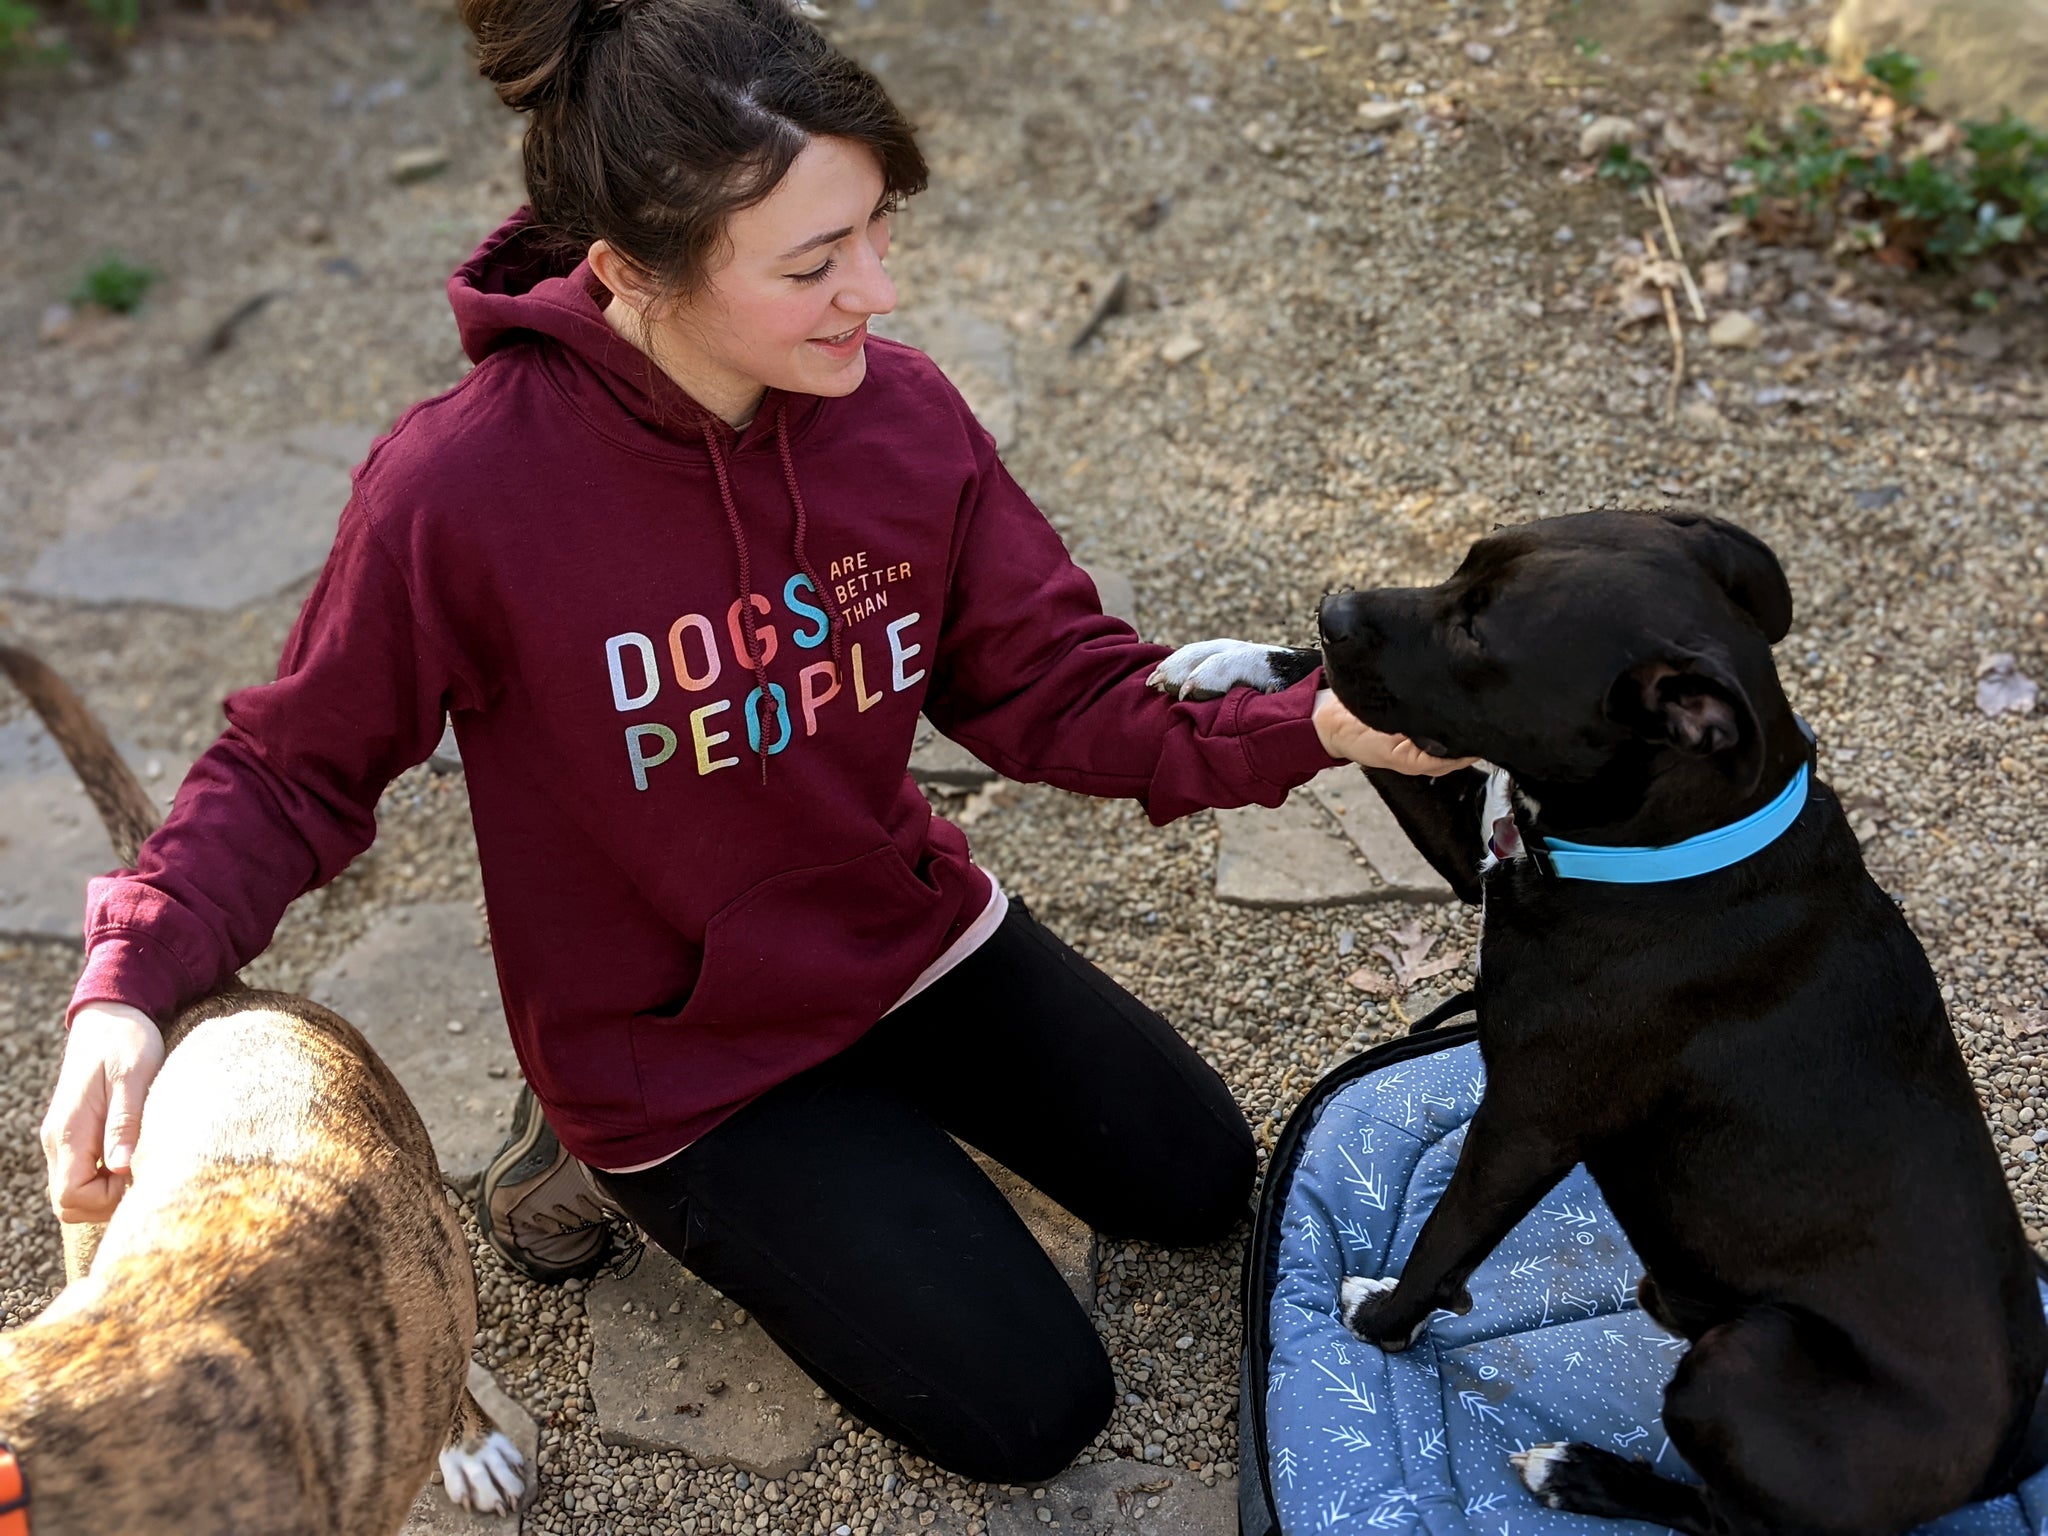 Girl petting dogs wearing Dogs are Better than people sweatshirt